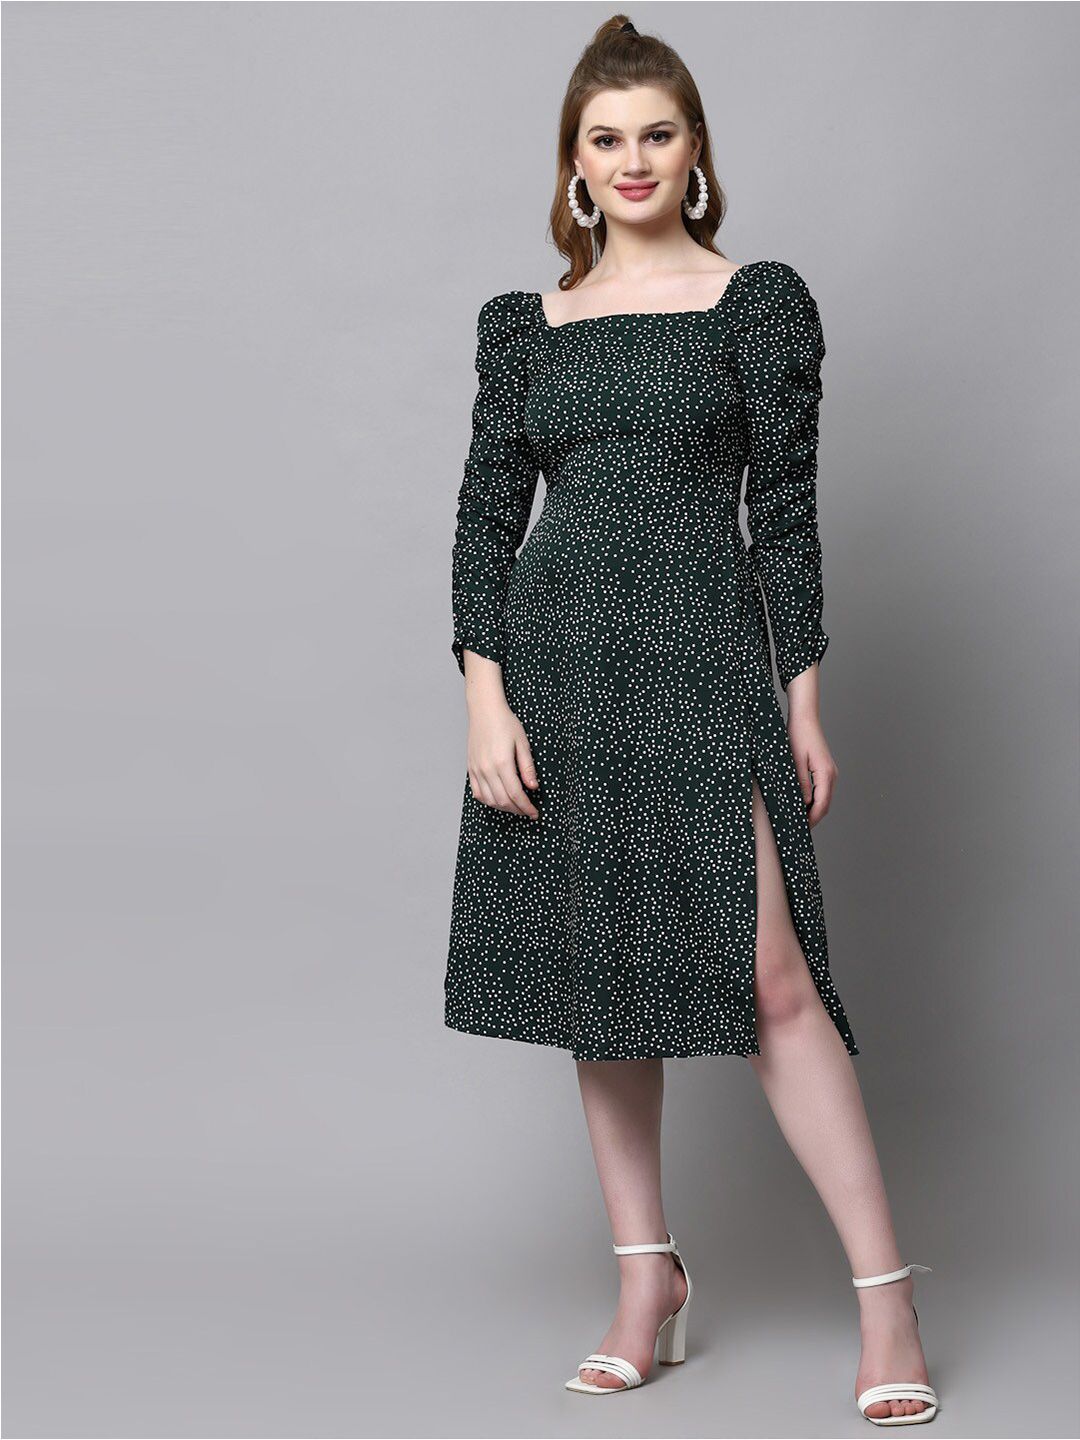 aayu Polka Dot Printed Square Neck Puff Sleeves Smocked Detailed A-Line Midi Dress Price in India